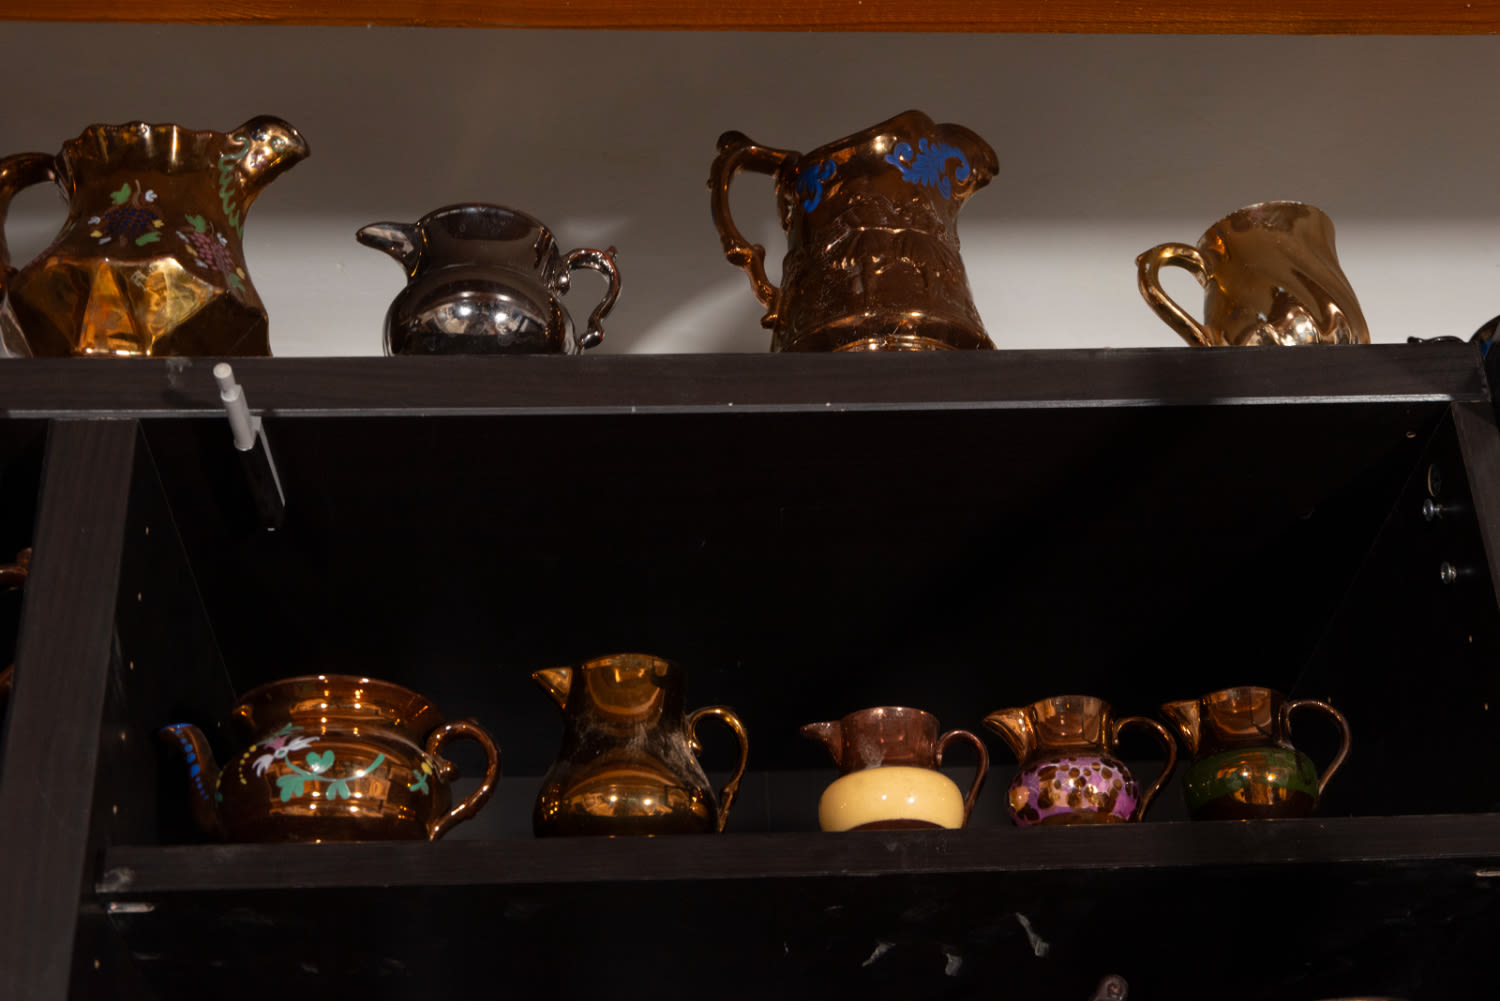 Collection of 78 English Earthenware Jugs from the 19th to 20th centuries - Image 4 of 10